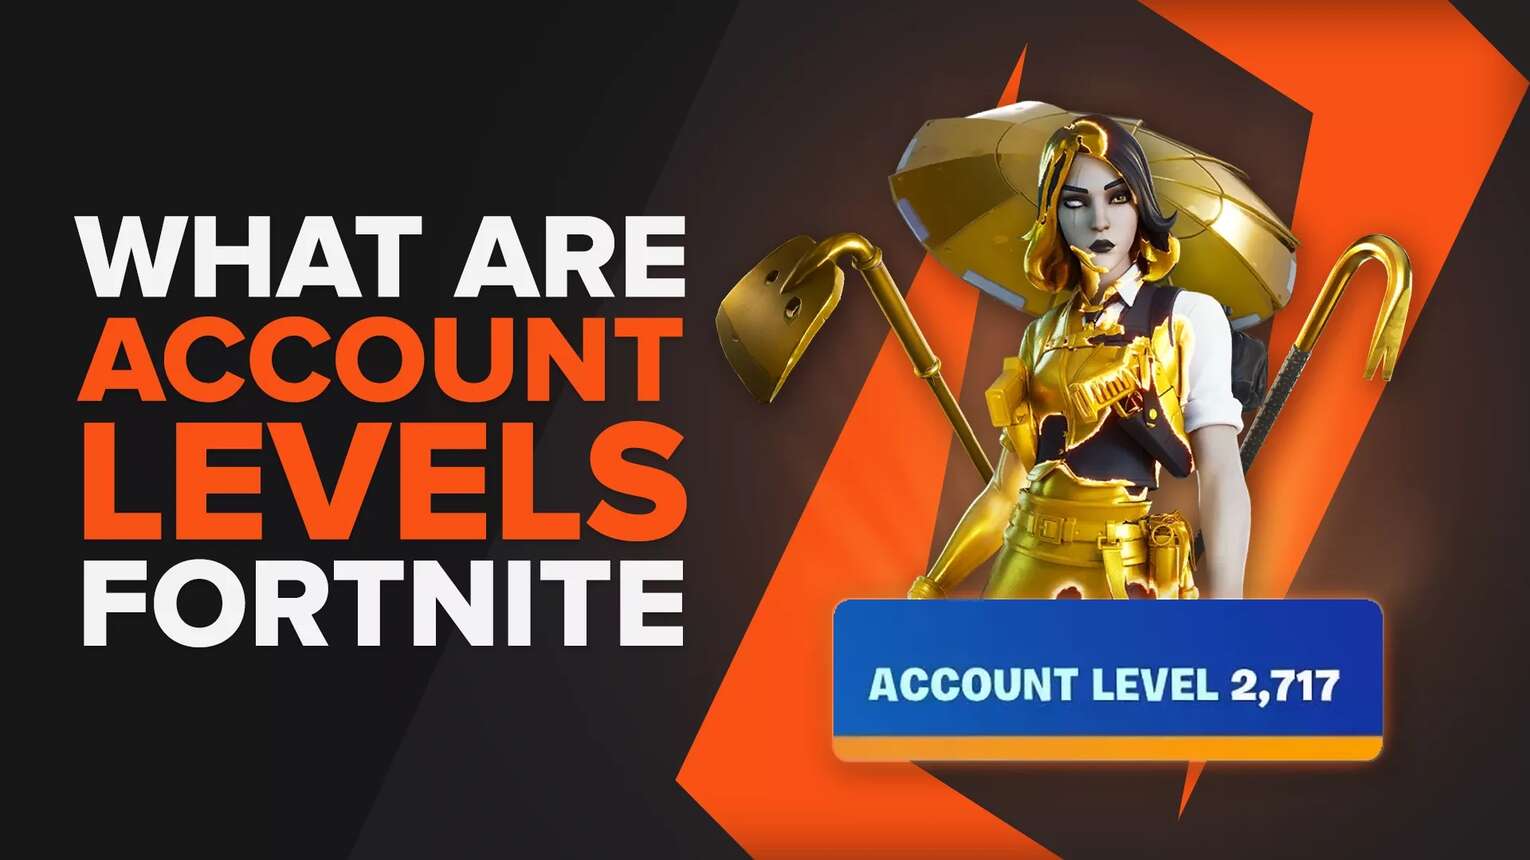 Fortnite Account Levels: What Are They Exactly?